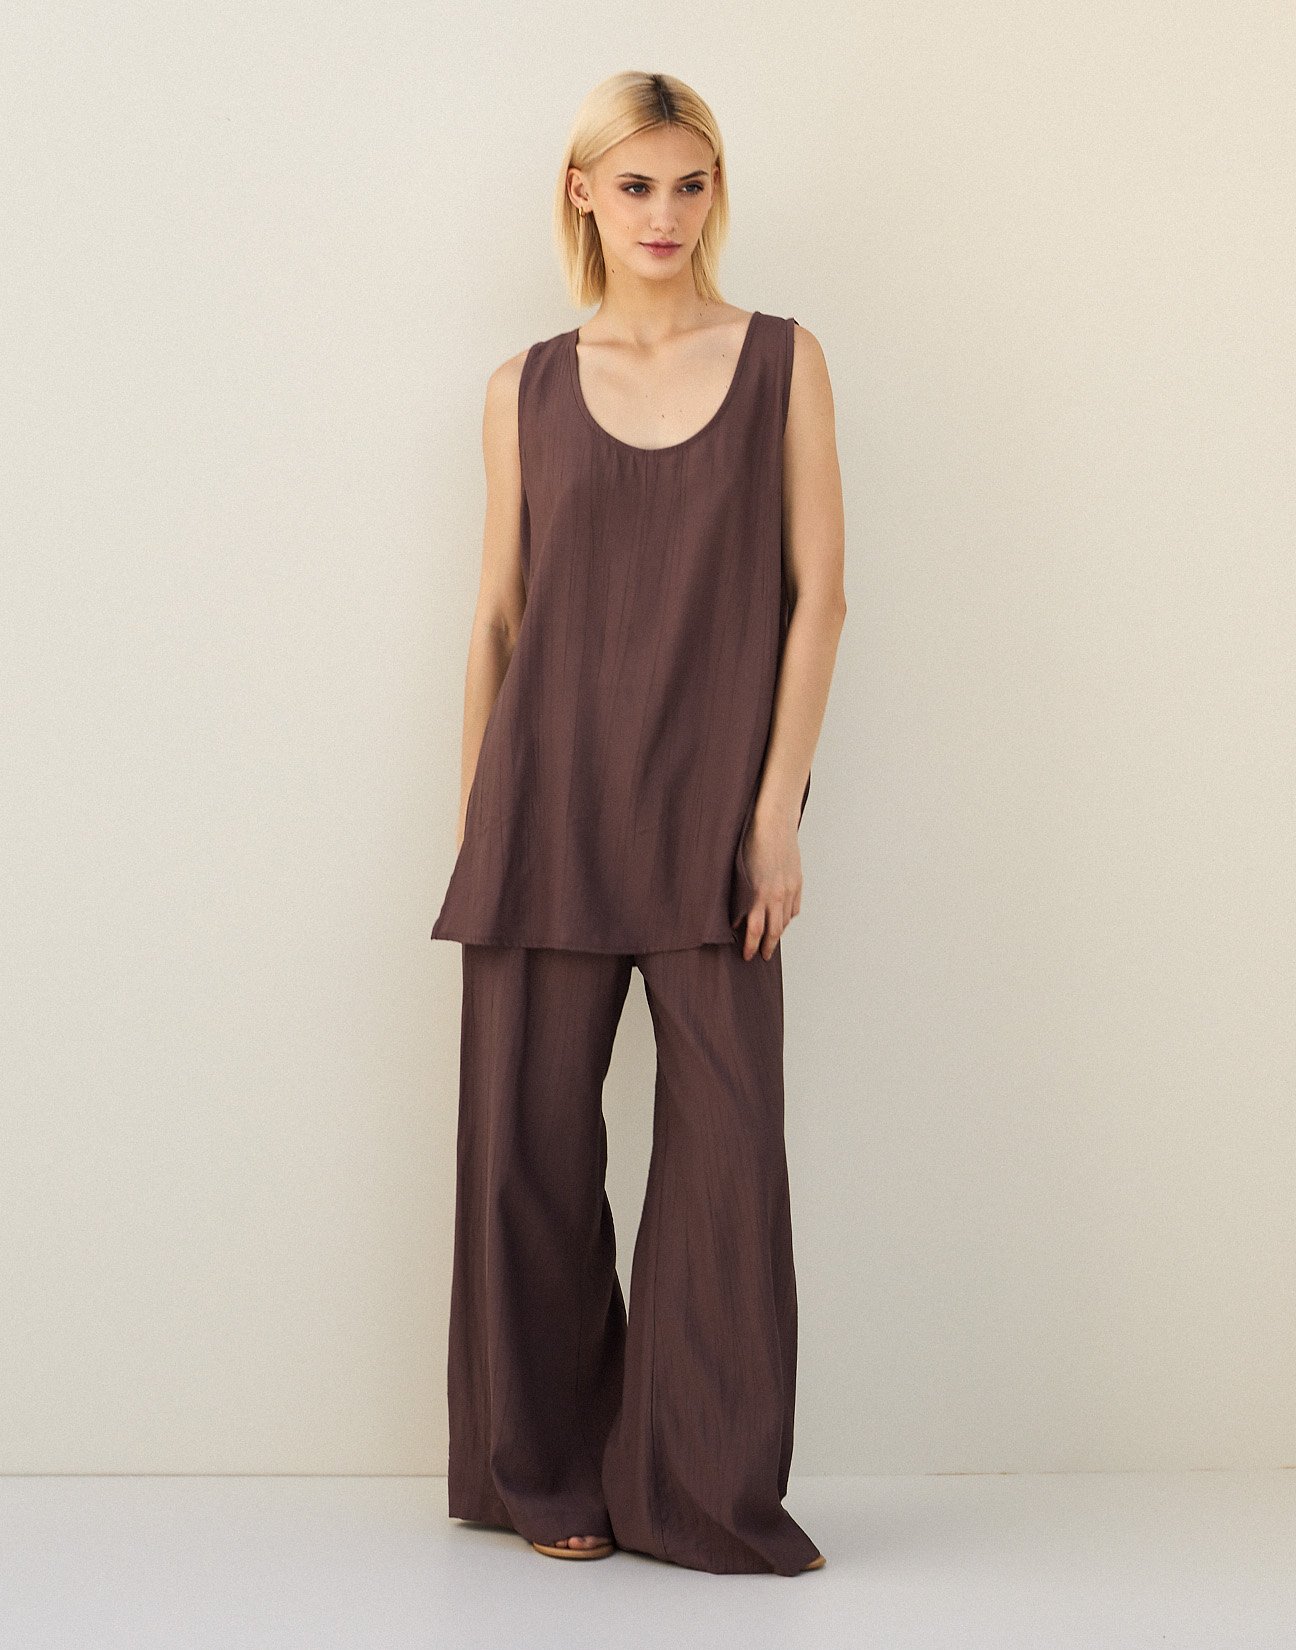 Sleeveless top with openings